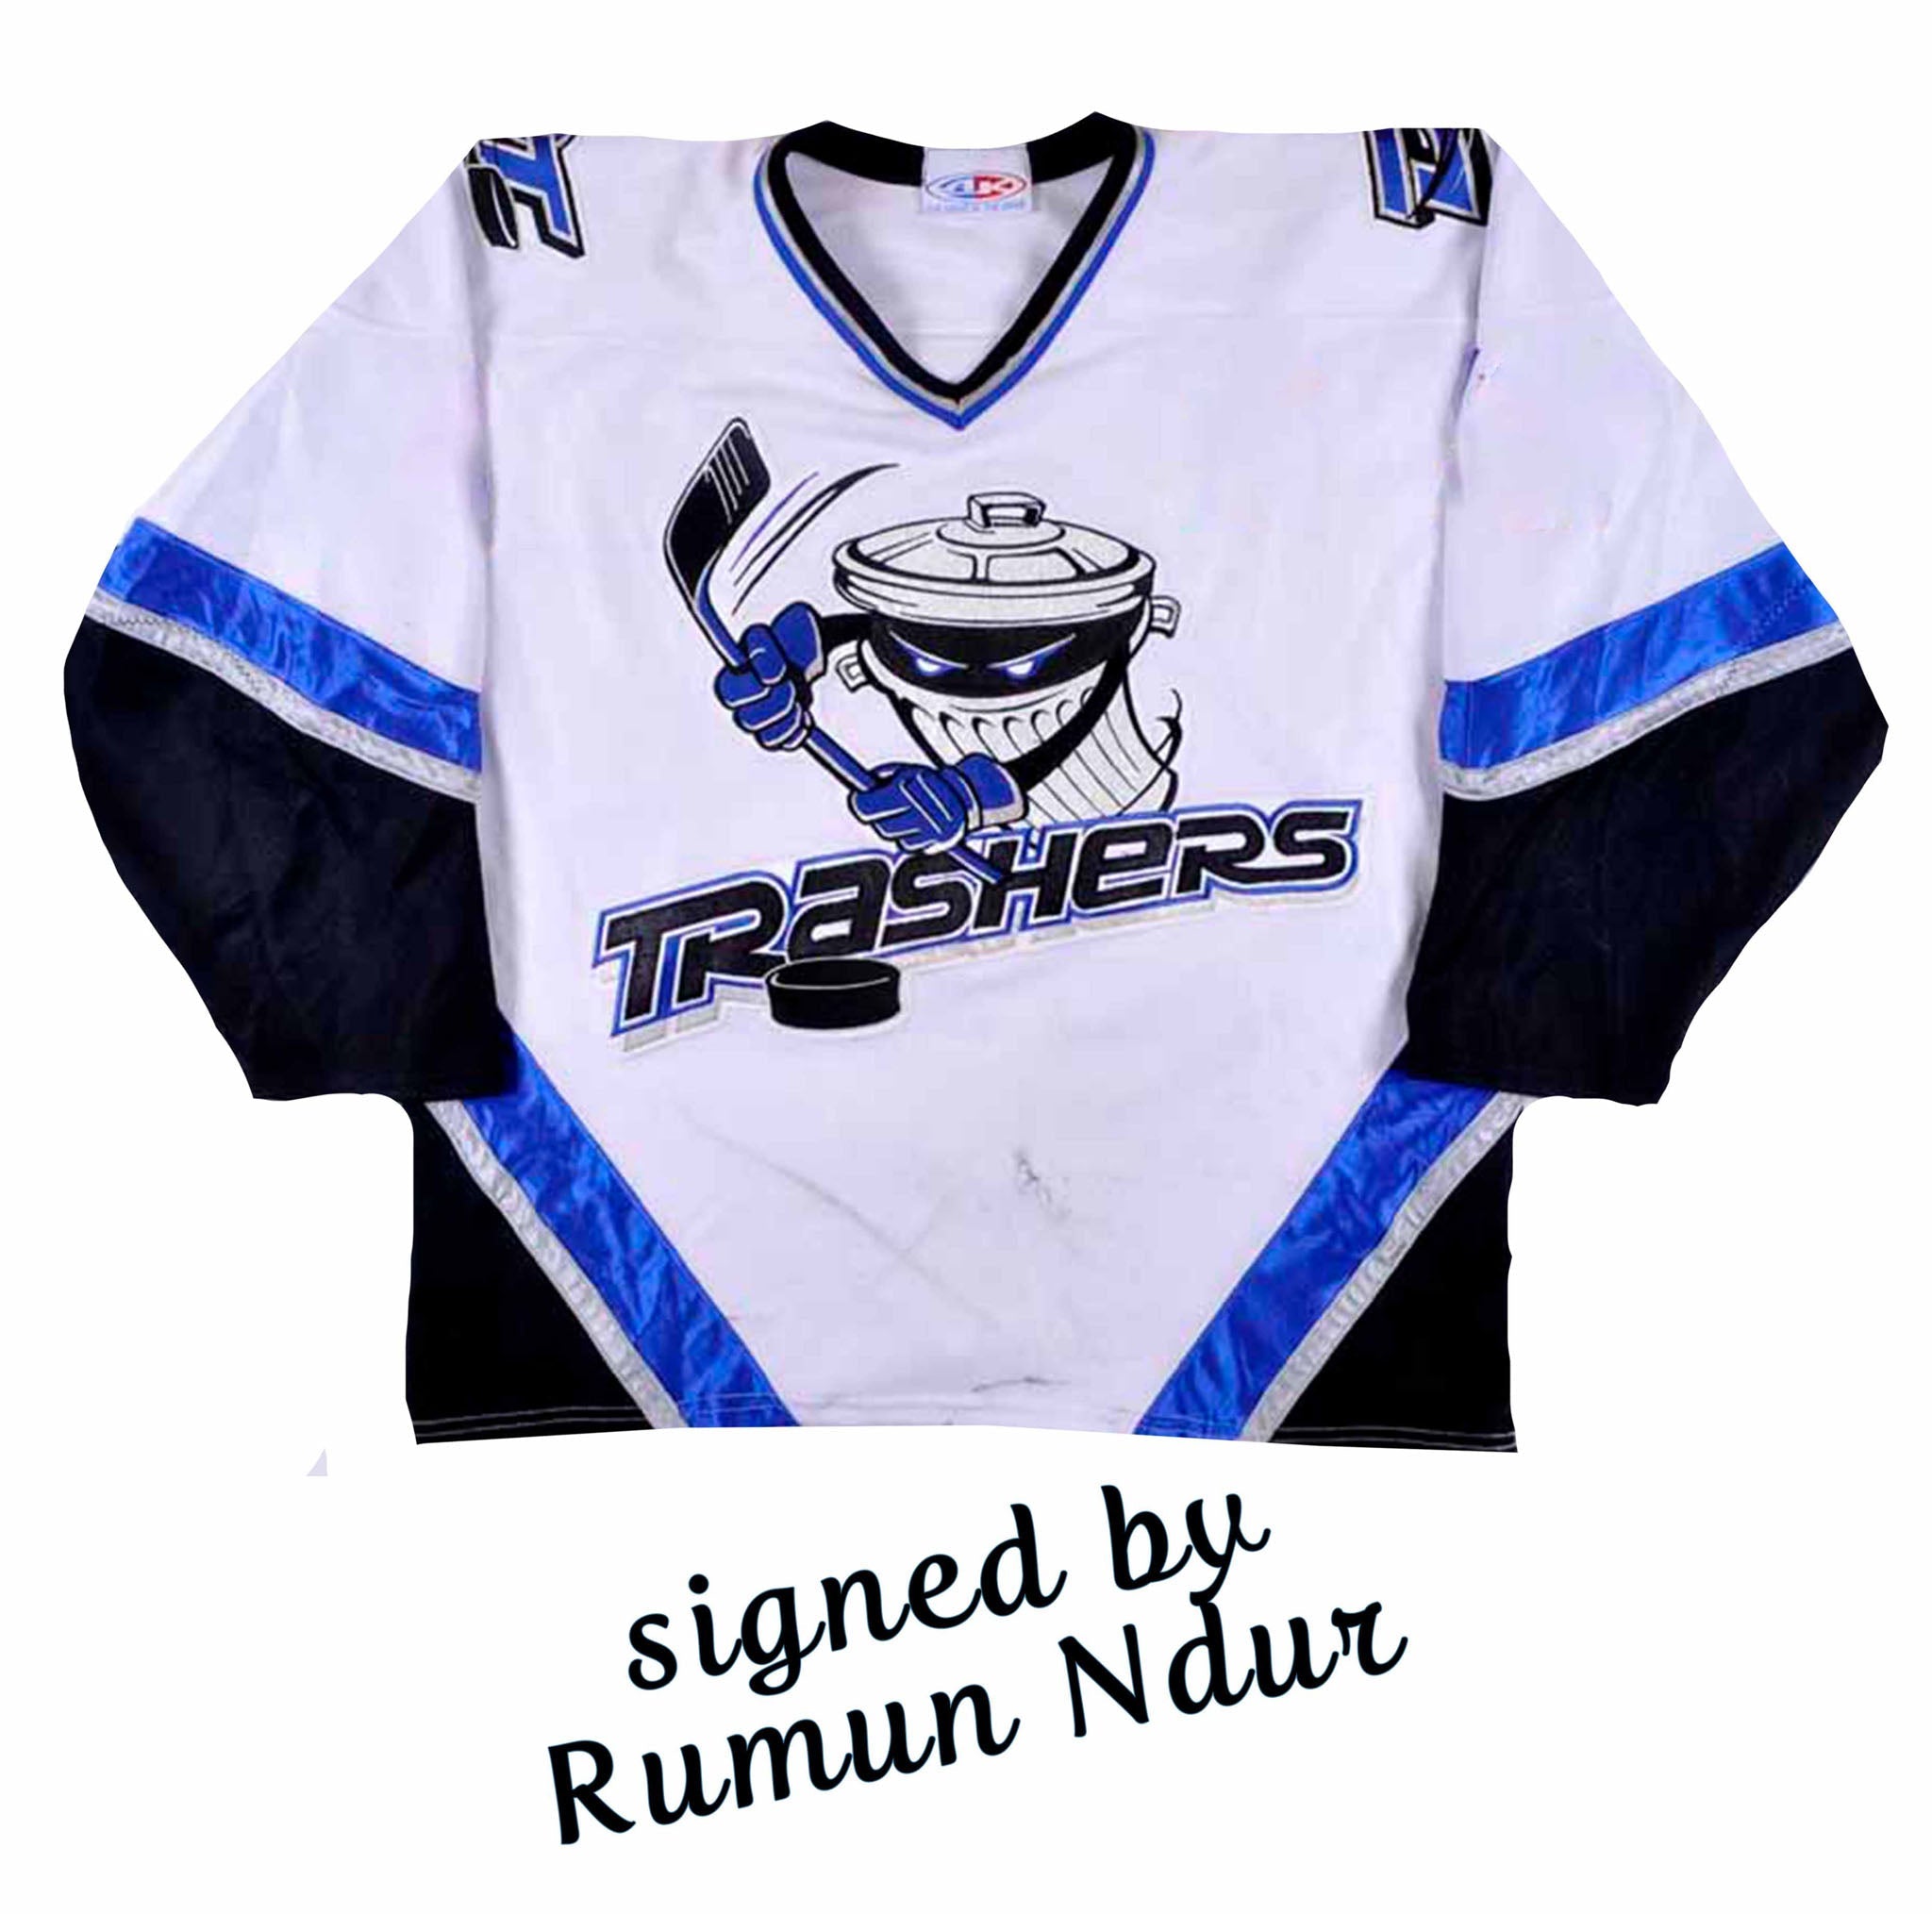 Enter Raffle to Win Danbury Trashers Jersey hosted by Coventry Blaze